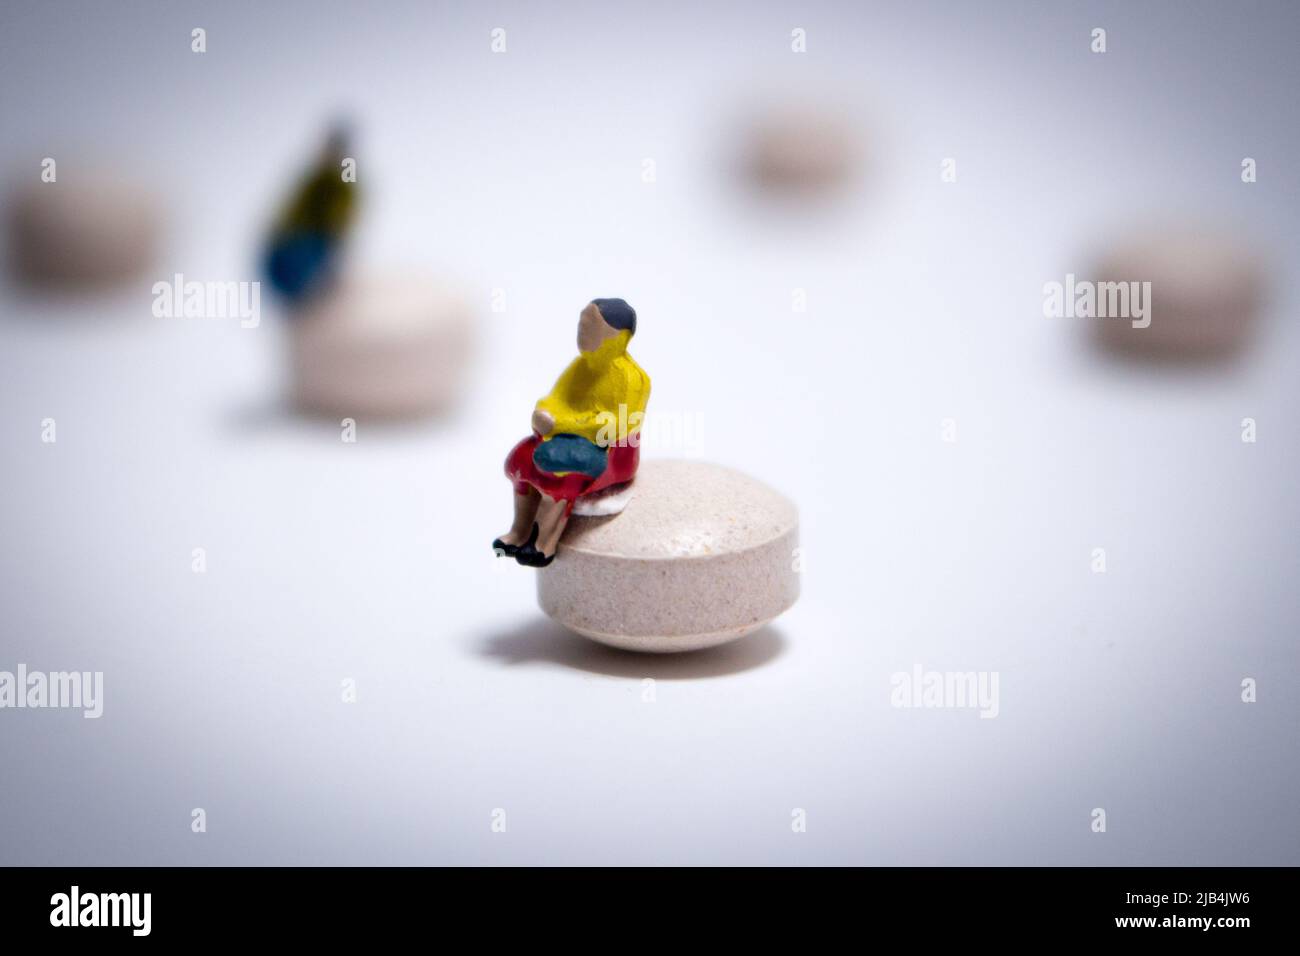 Miniature old woman in yellow outfit sitting on a pill in the white bg. Tablets are randomly placed and the woman keeps distance away from the guy. Stock Photo